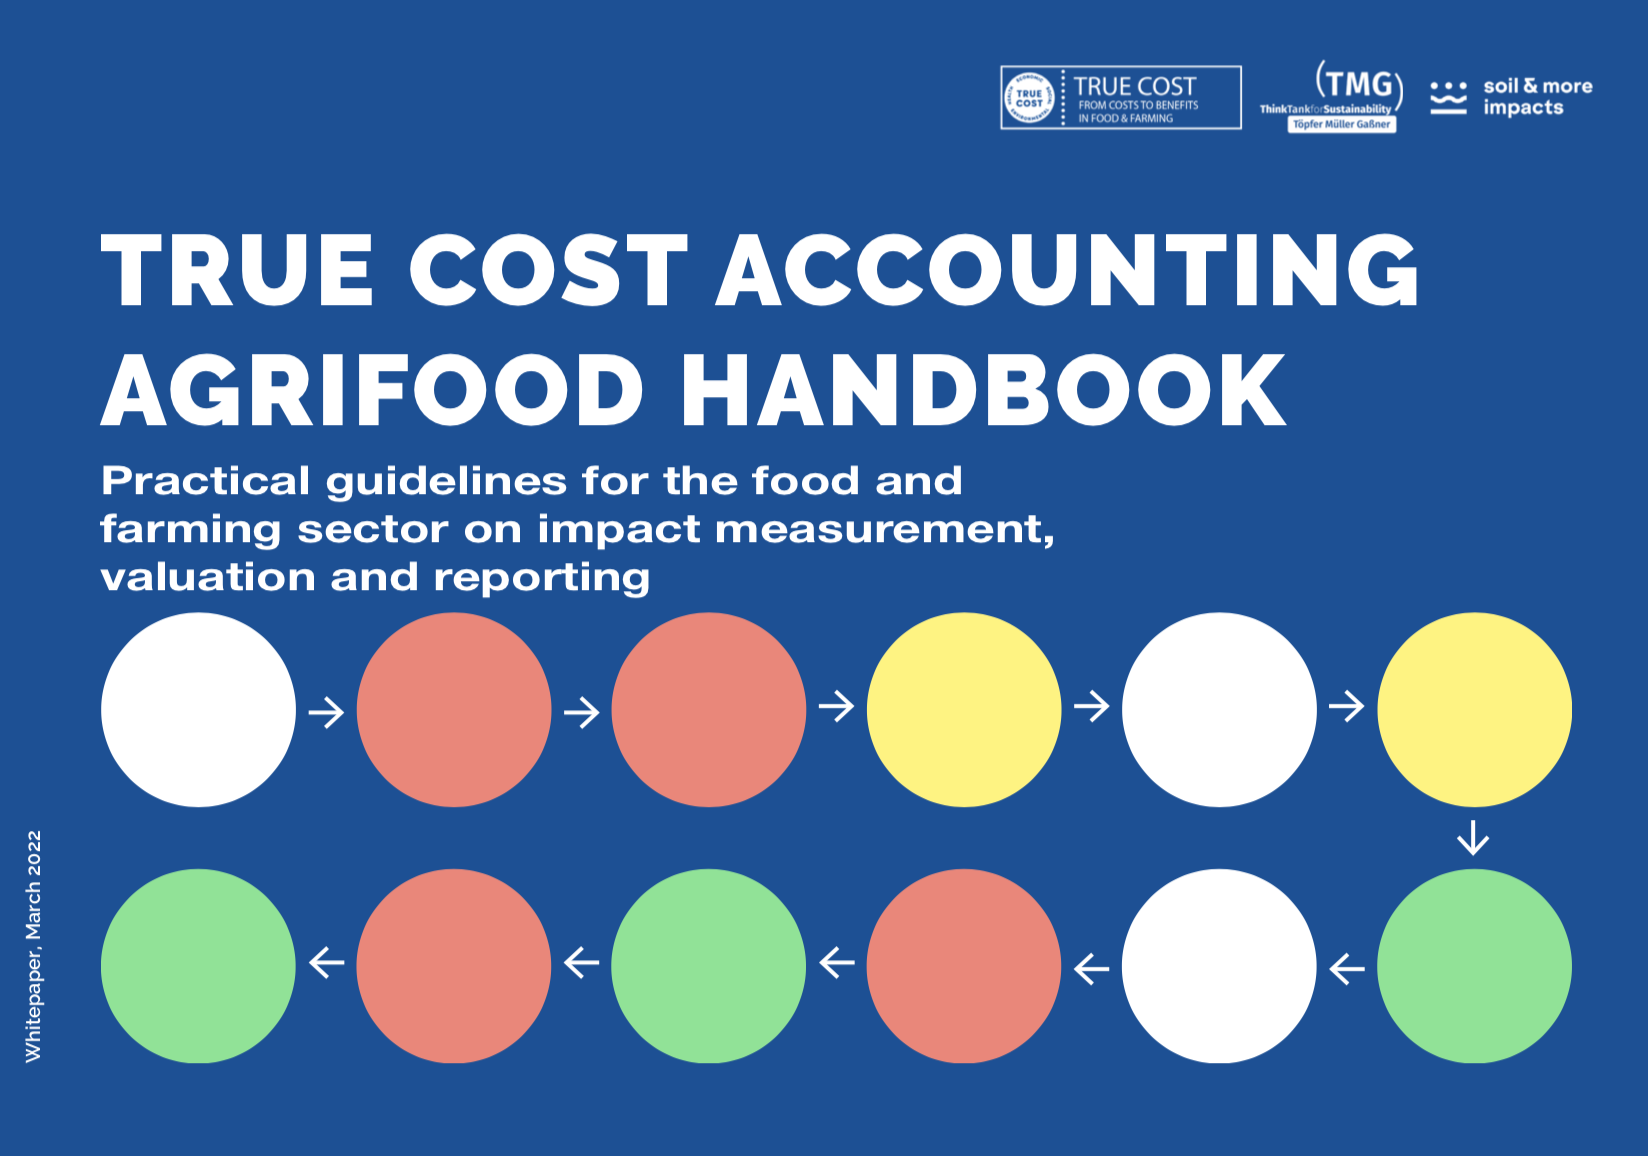 True Cost Initiative launches standardised guidelines for the agrifood sector